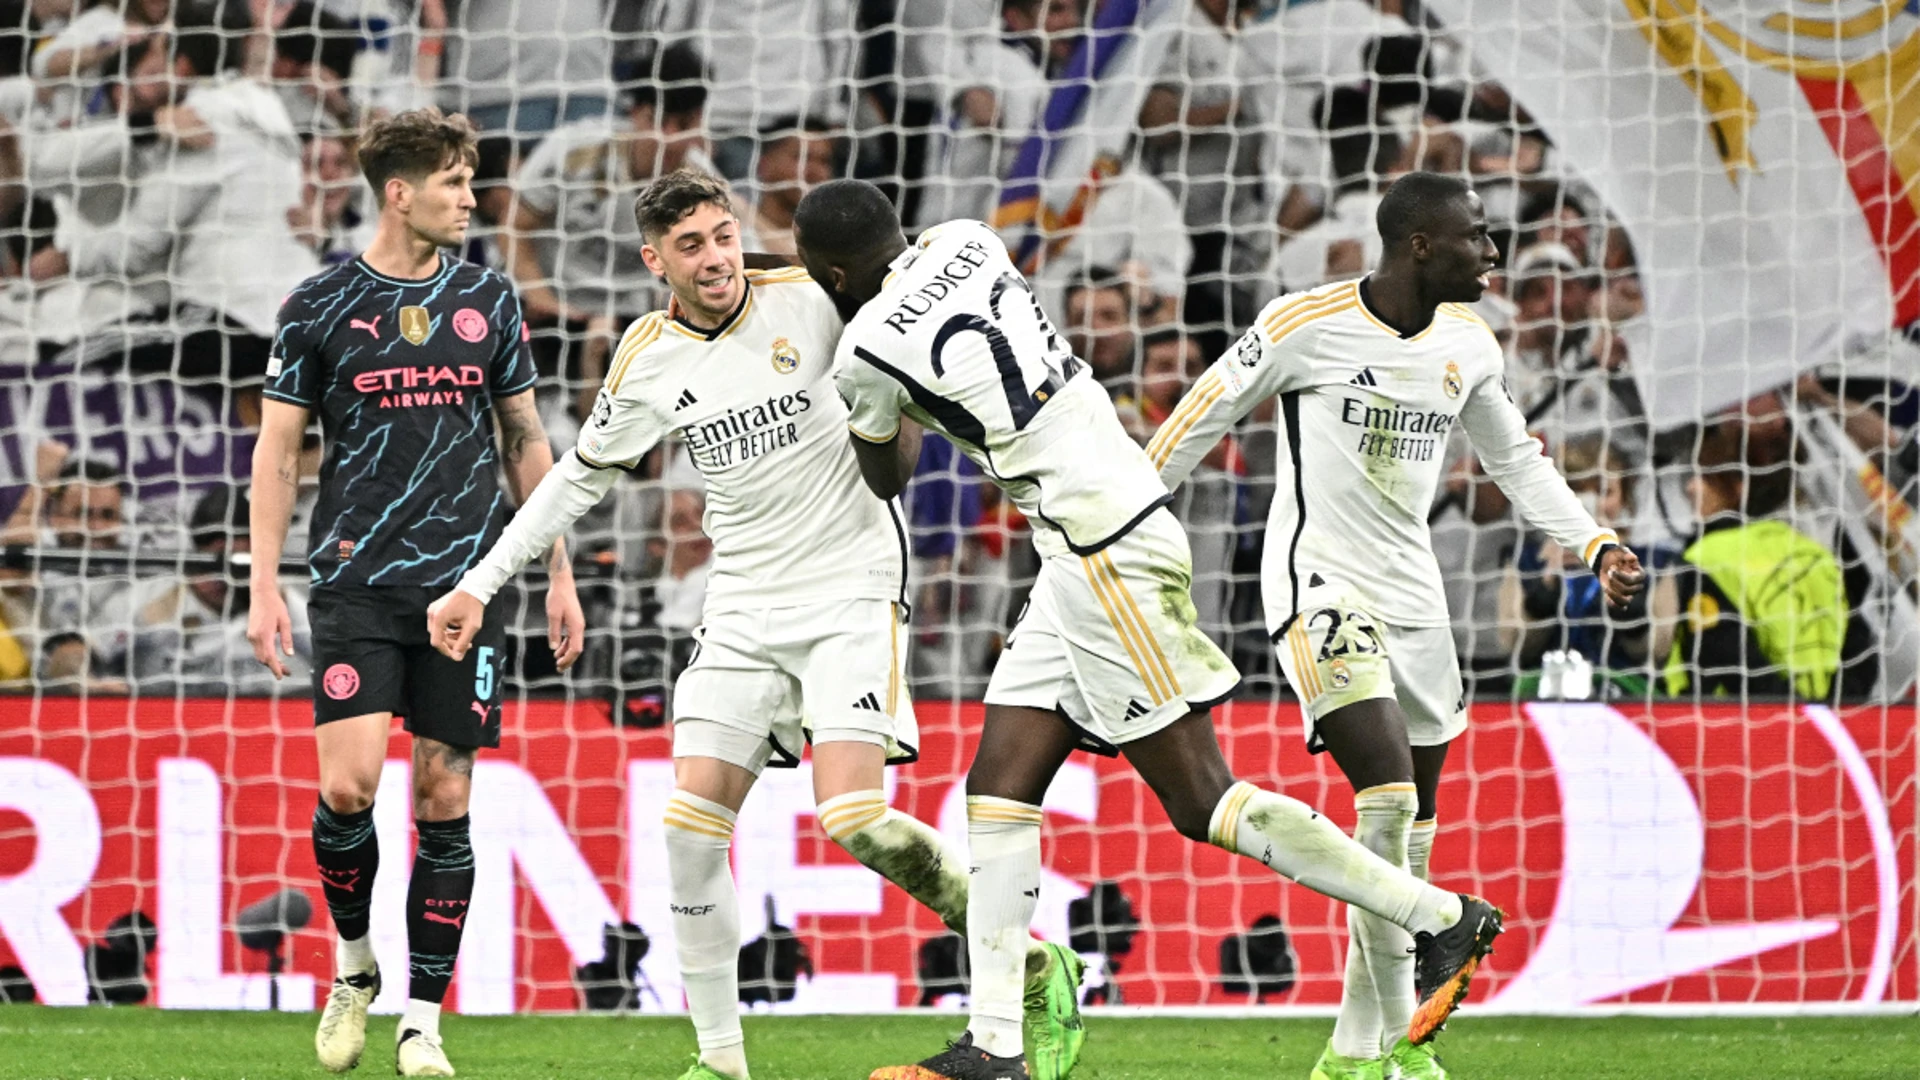 Real Madrid, Man City draw thriller in Champions League quarterfinal